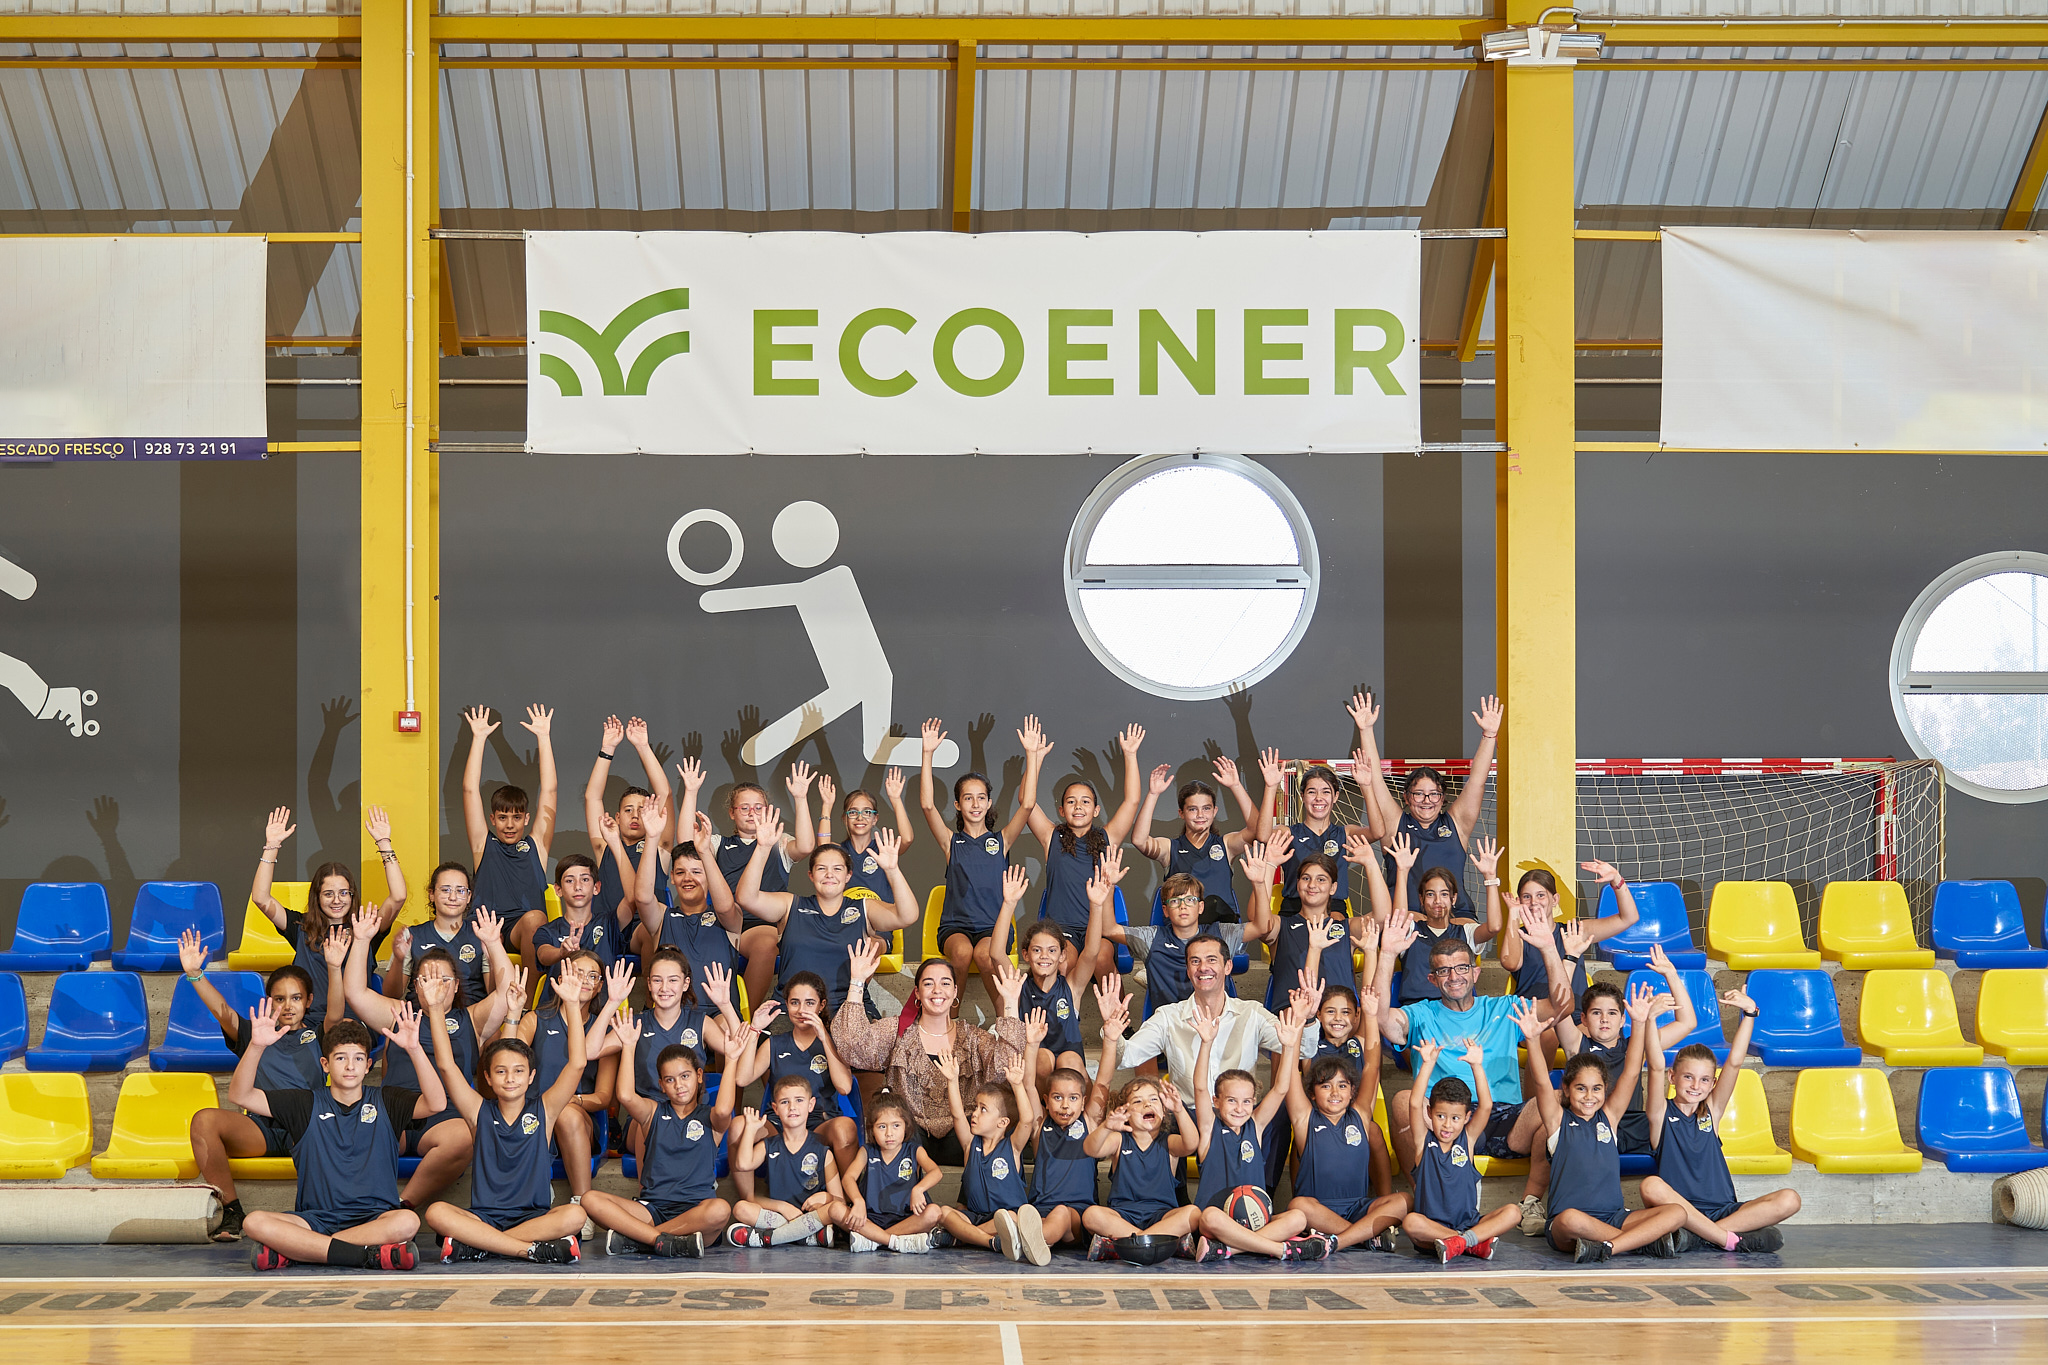 Ecoener remains committed to young people and sport